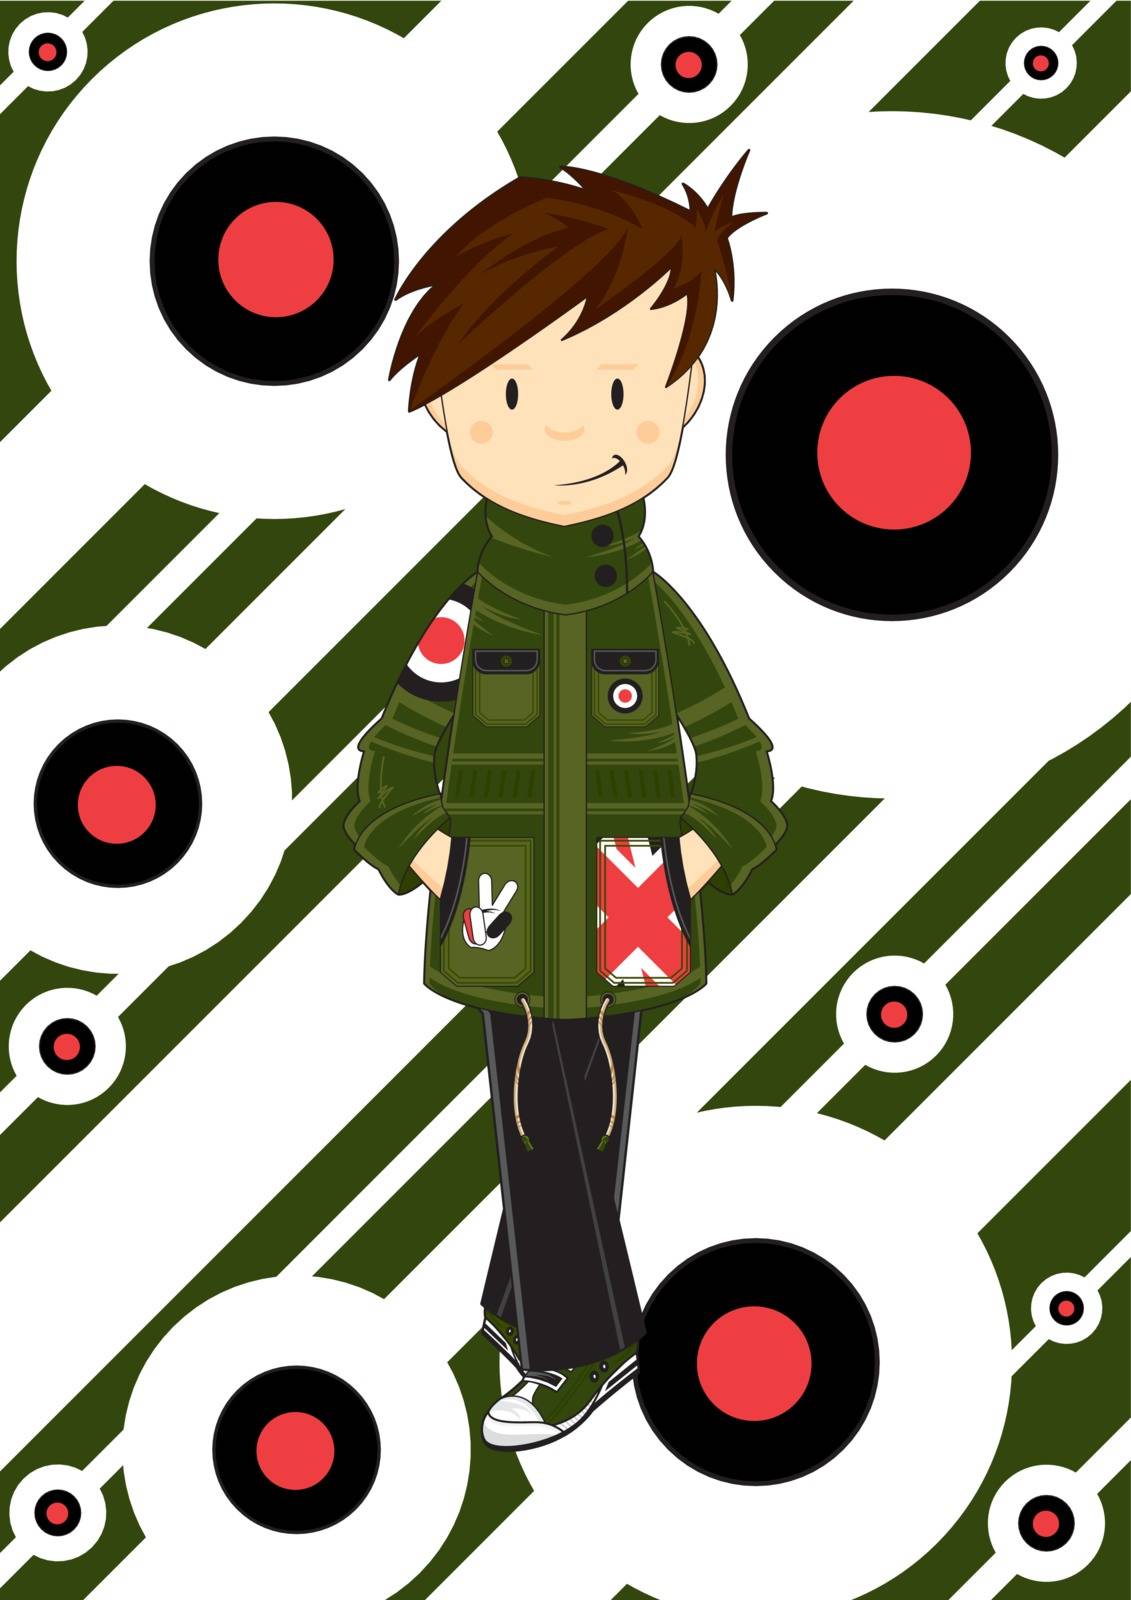 Keep the Faith with this Cool Mod Boy in Parka Jacket on a Target Patterned Background - by Mark Murphy Creative